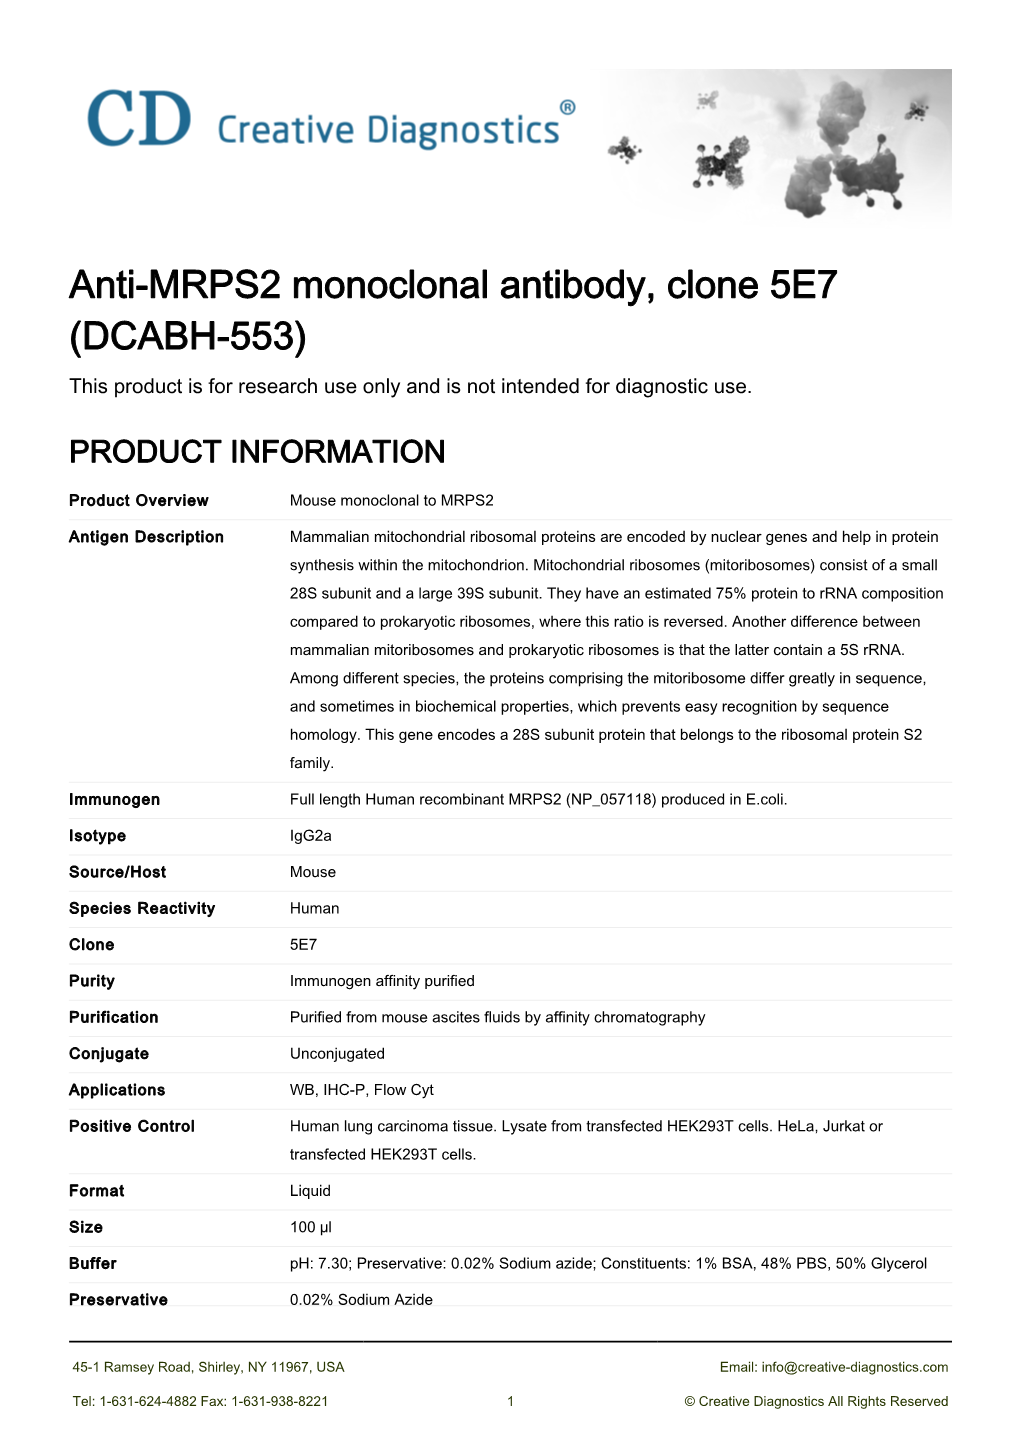 Anti-MRPS2 Monoclonal Antibody, Clone 5E7 (DCABH-553) This Product Is for Research Use Only and Is Not Intended for Diagnostic Use